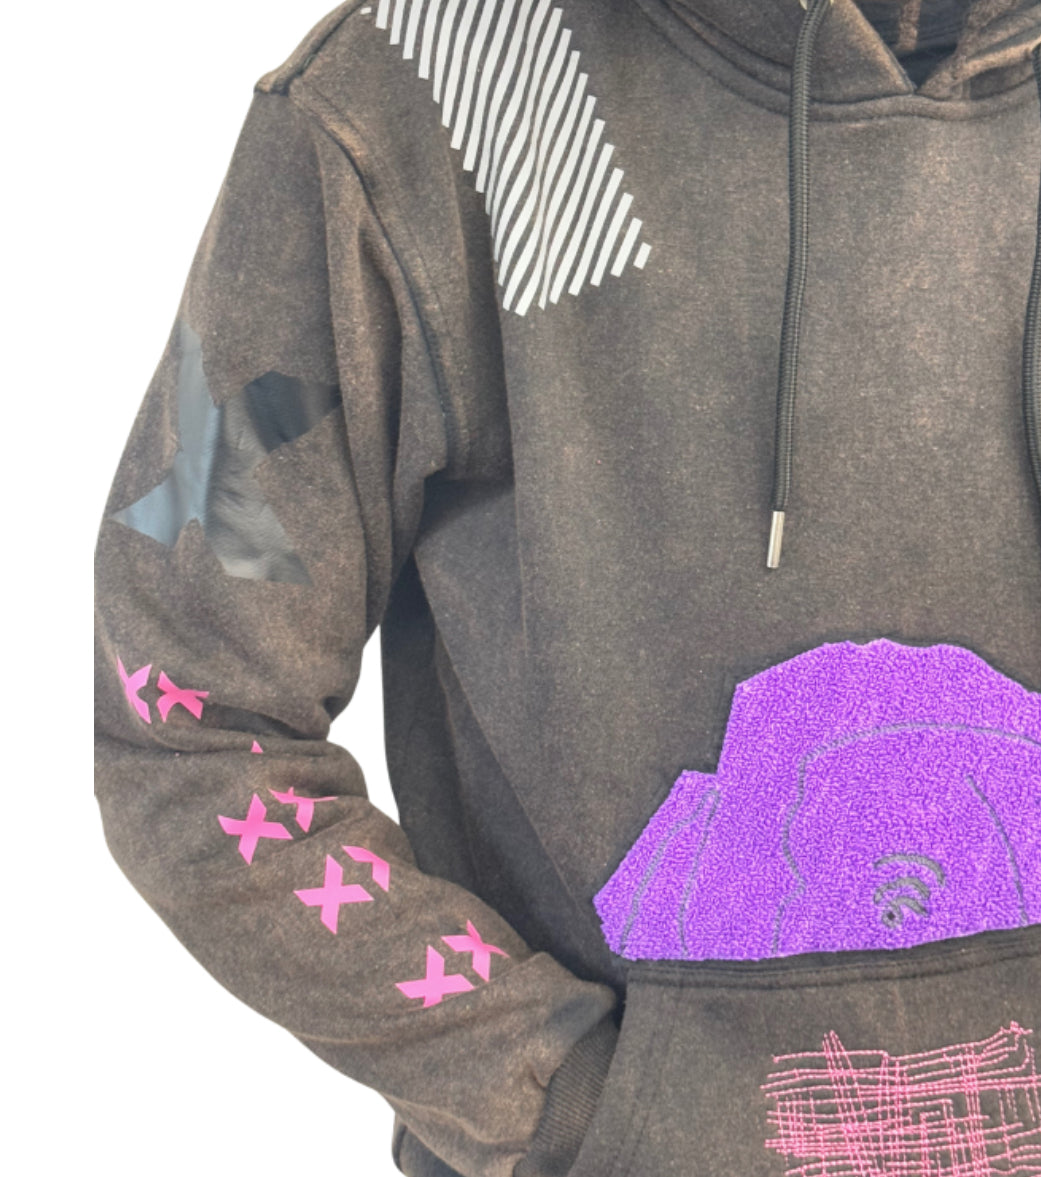 Made in The City X ART&CO Damage  Rose Hoodie